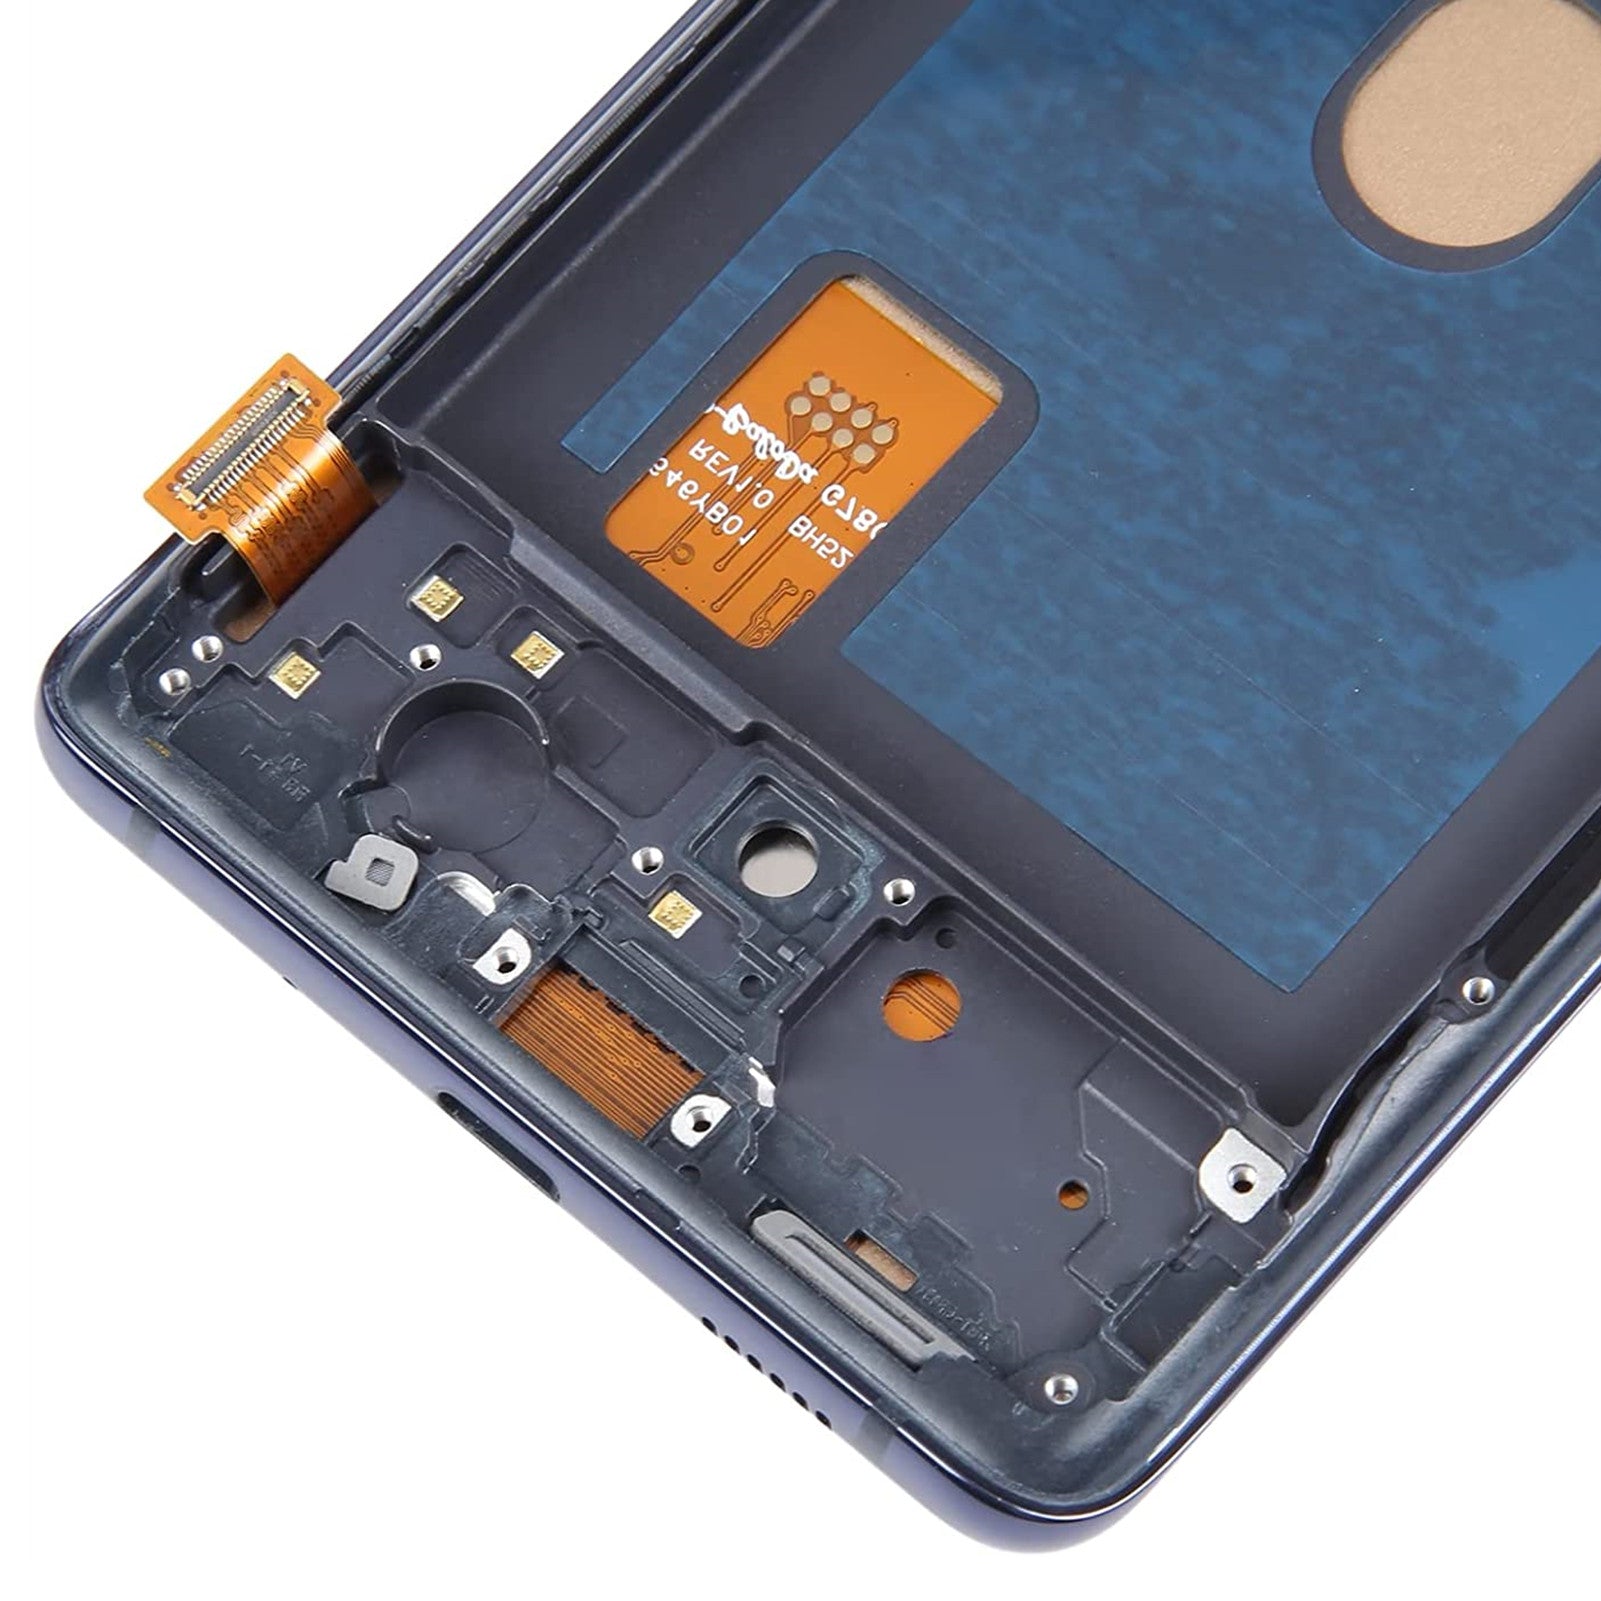 AMOLED Display Assembly With Frame for Samsung Galaxy S20 FE